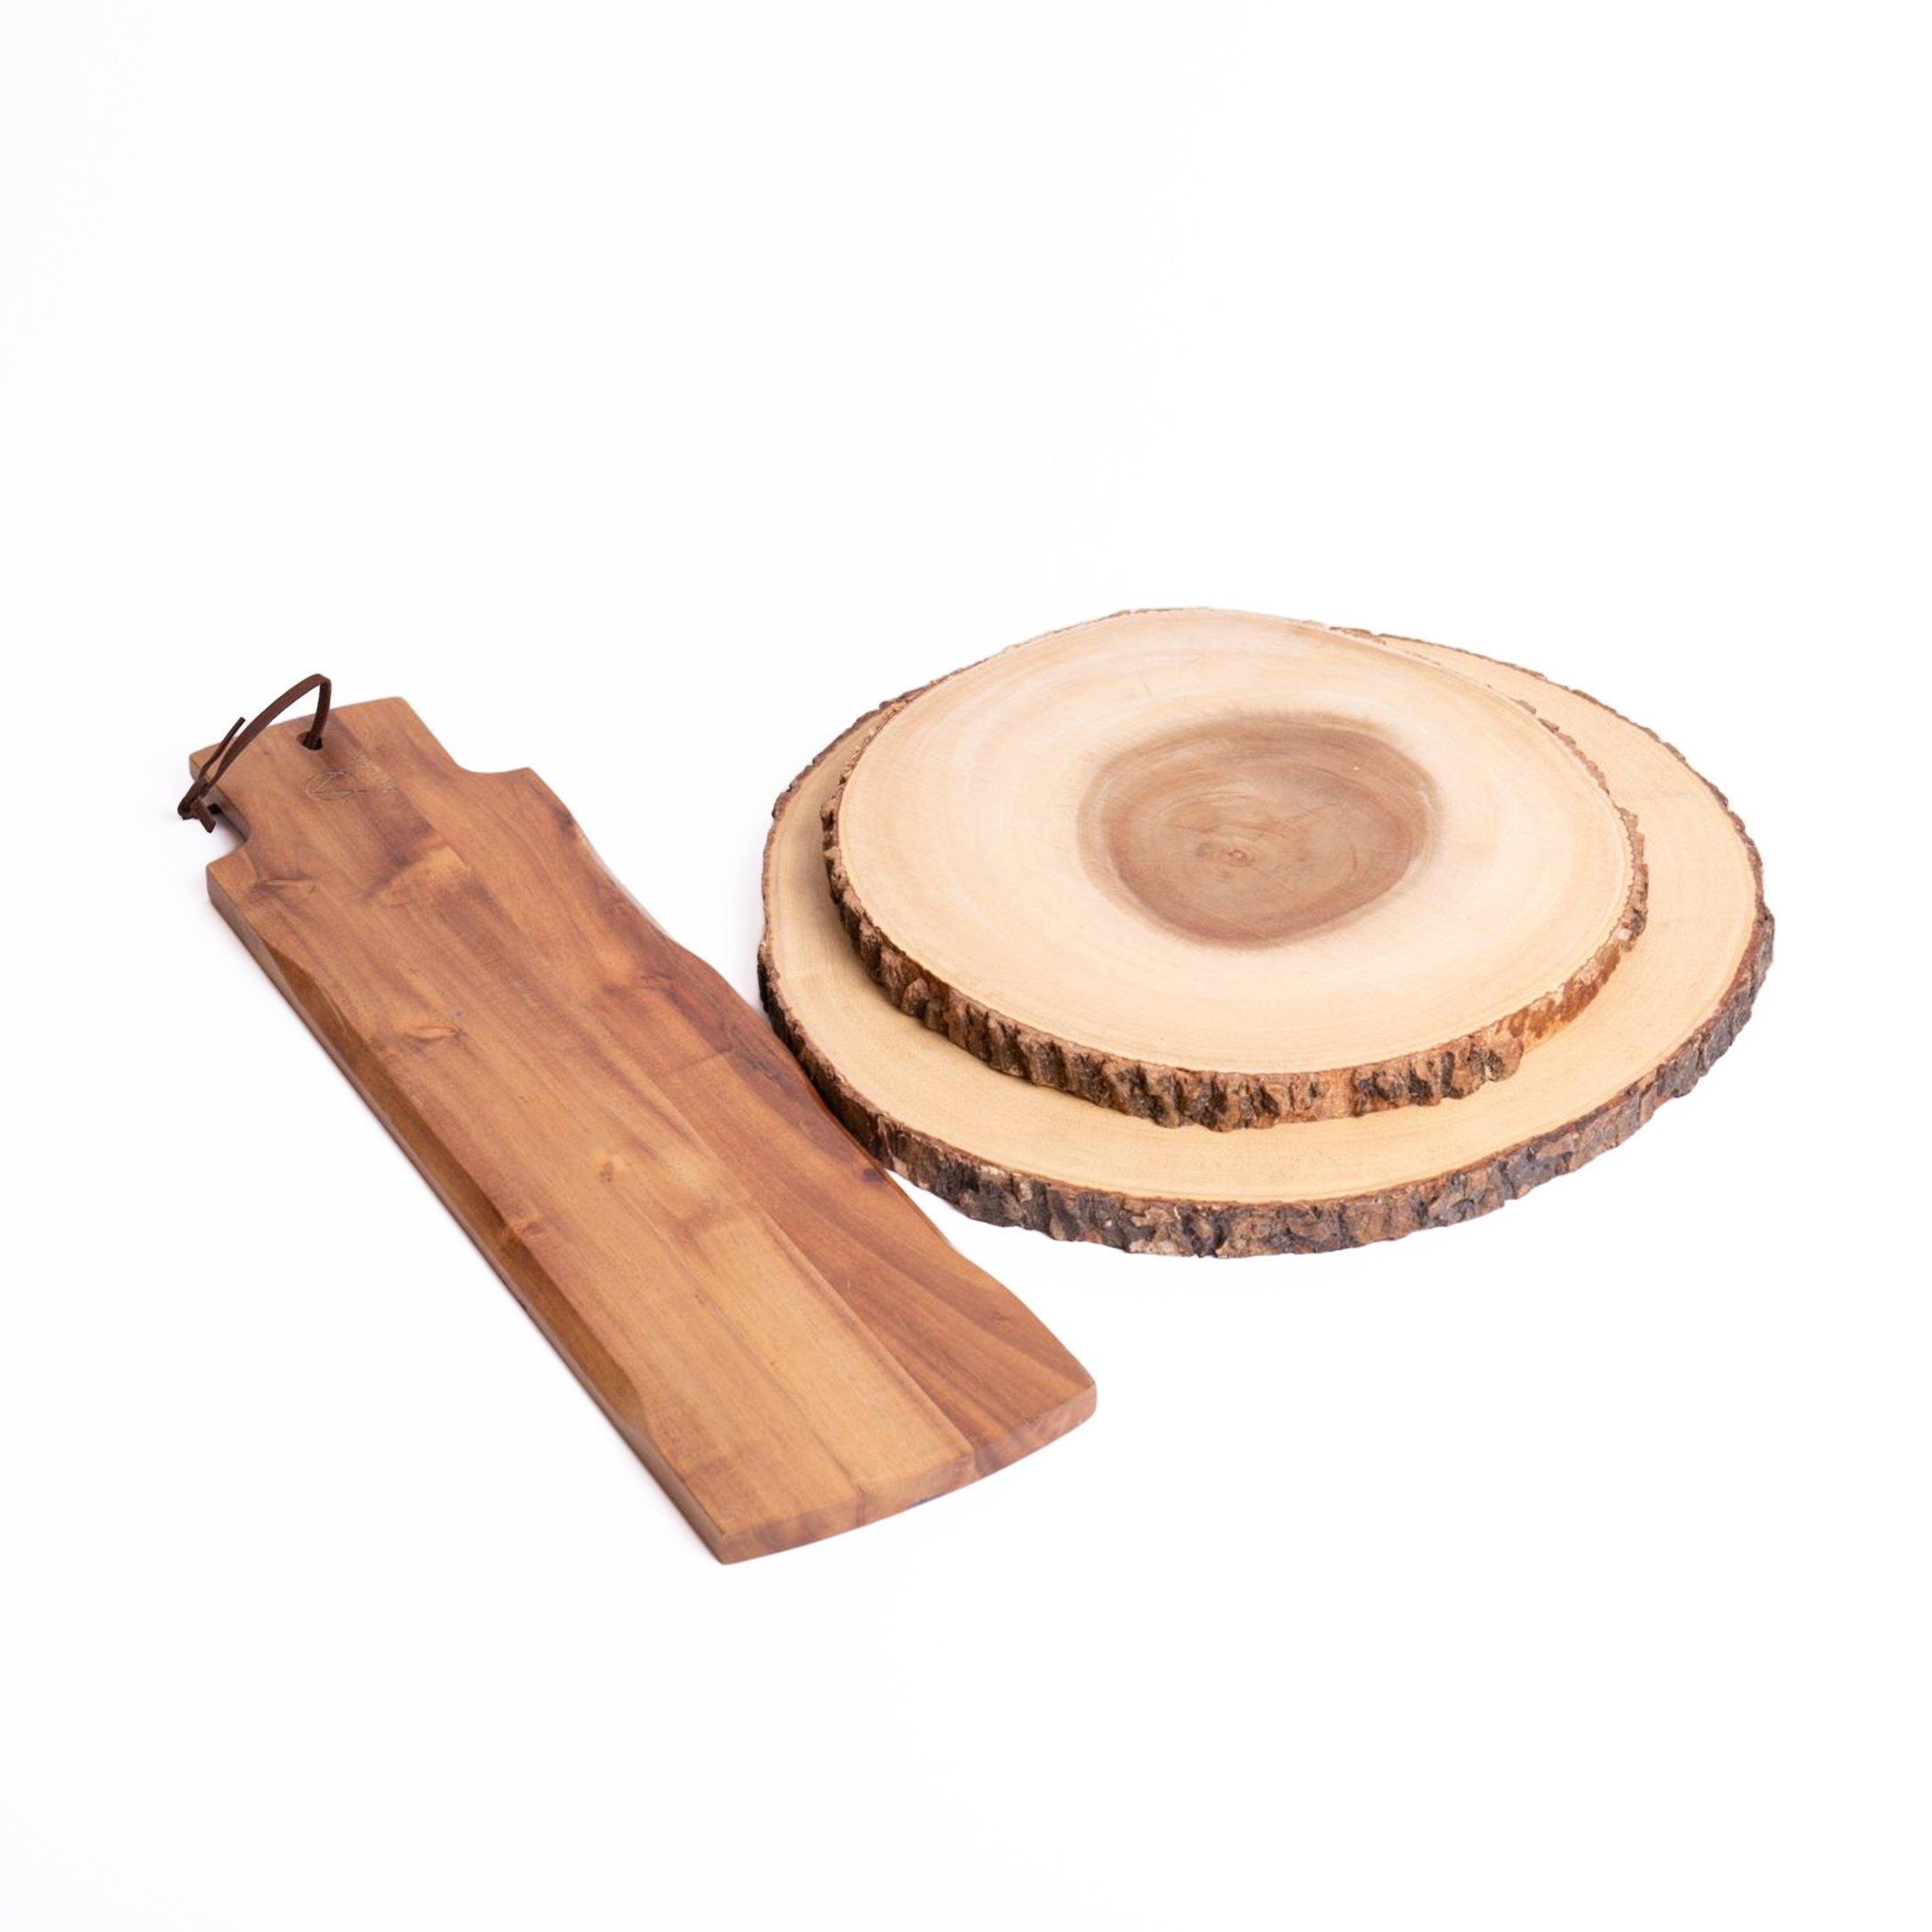 Acacia Wooden Serving Board Set with Baguette Board and 2x Wooden Serving Boards, Medium and Large